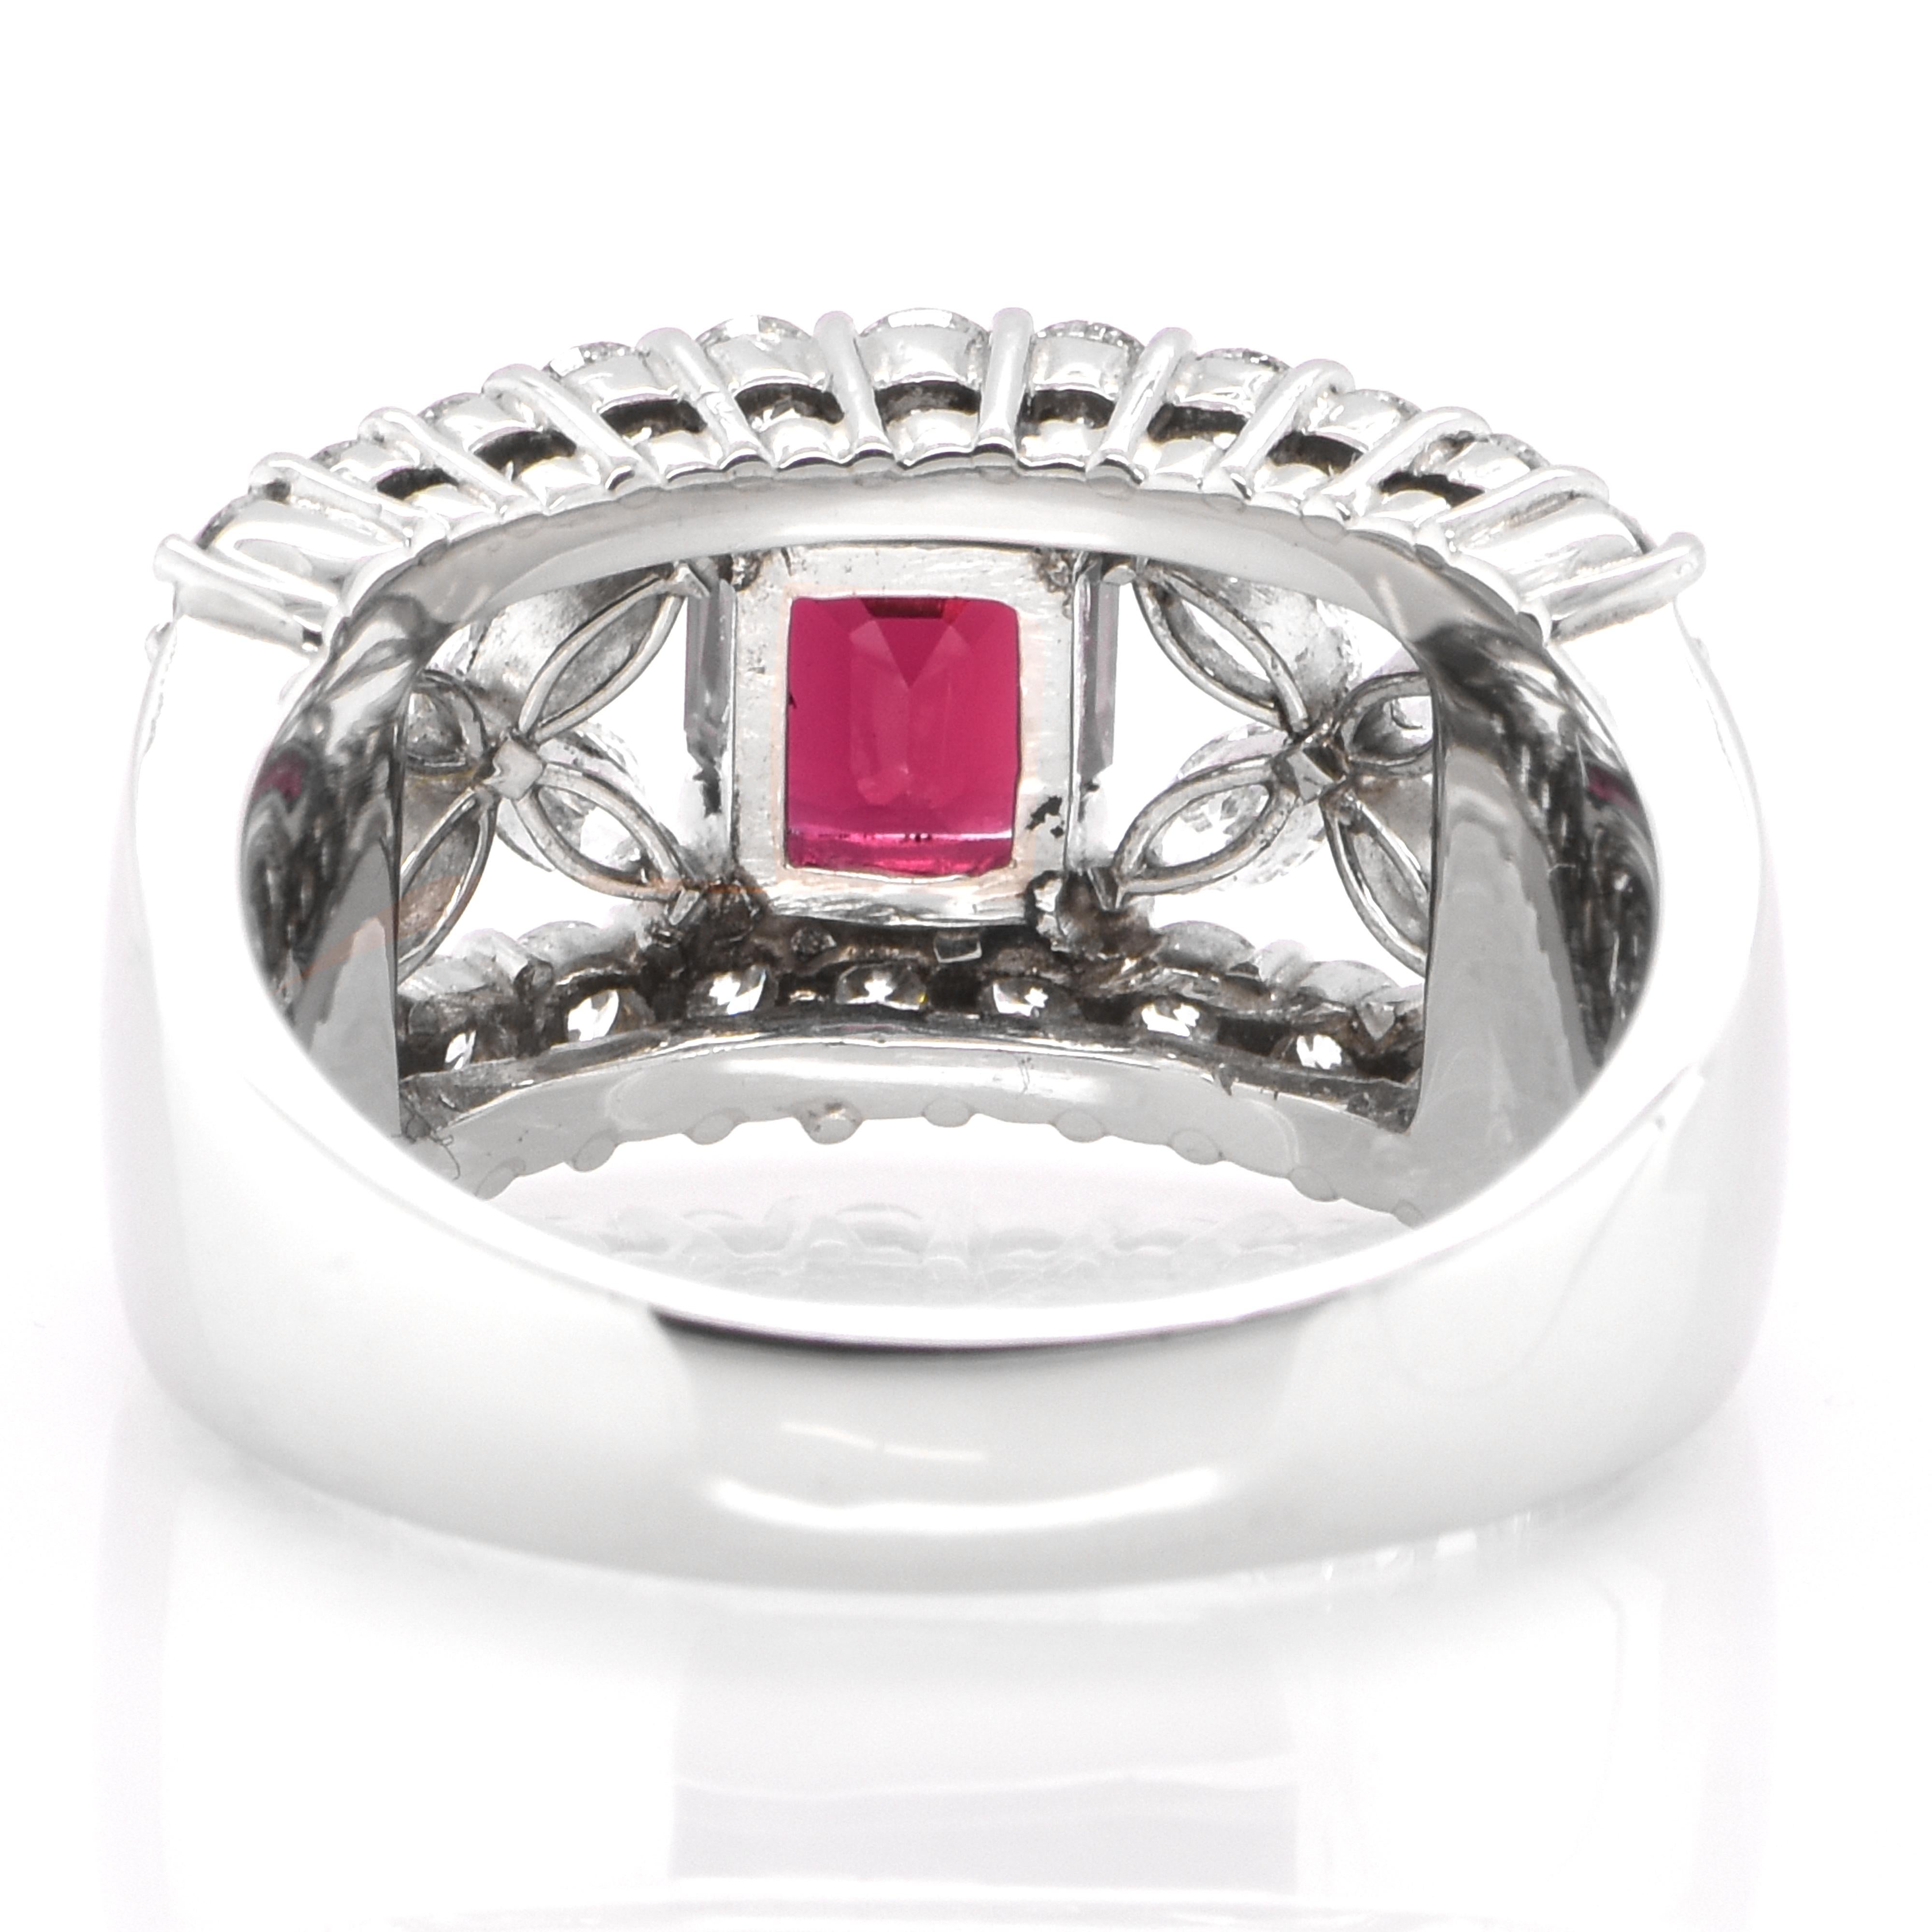 Square Cut GIA Certified 1.32 Carat Natural Siam, Untreated Ruby Ring Set in Platinum